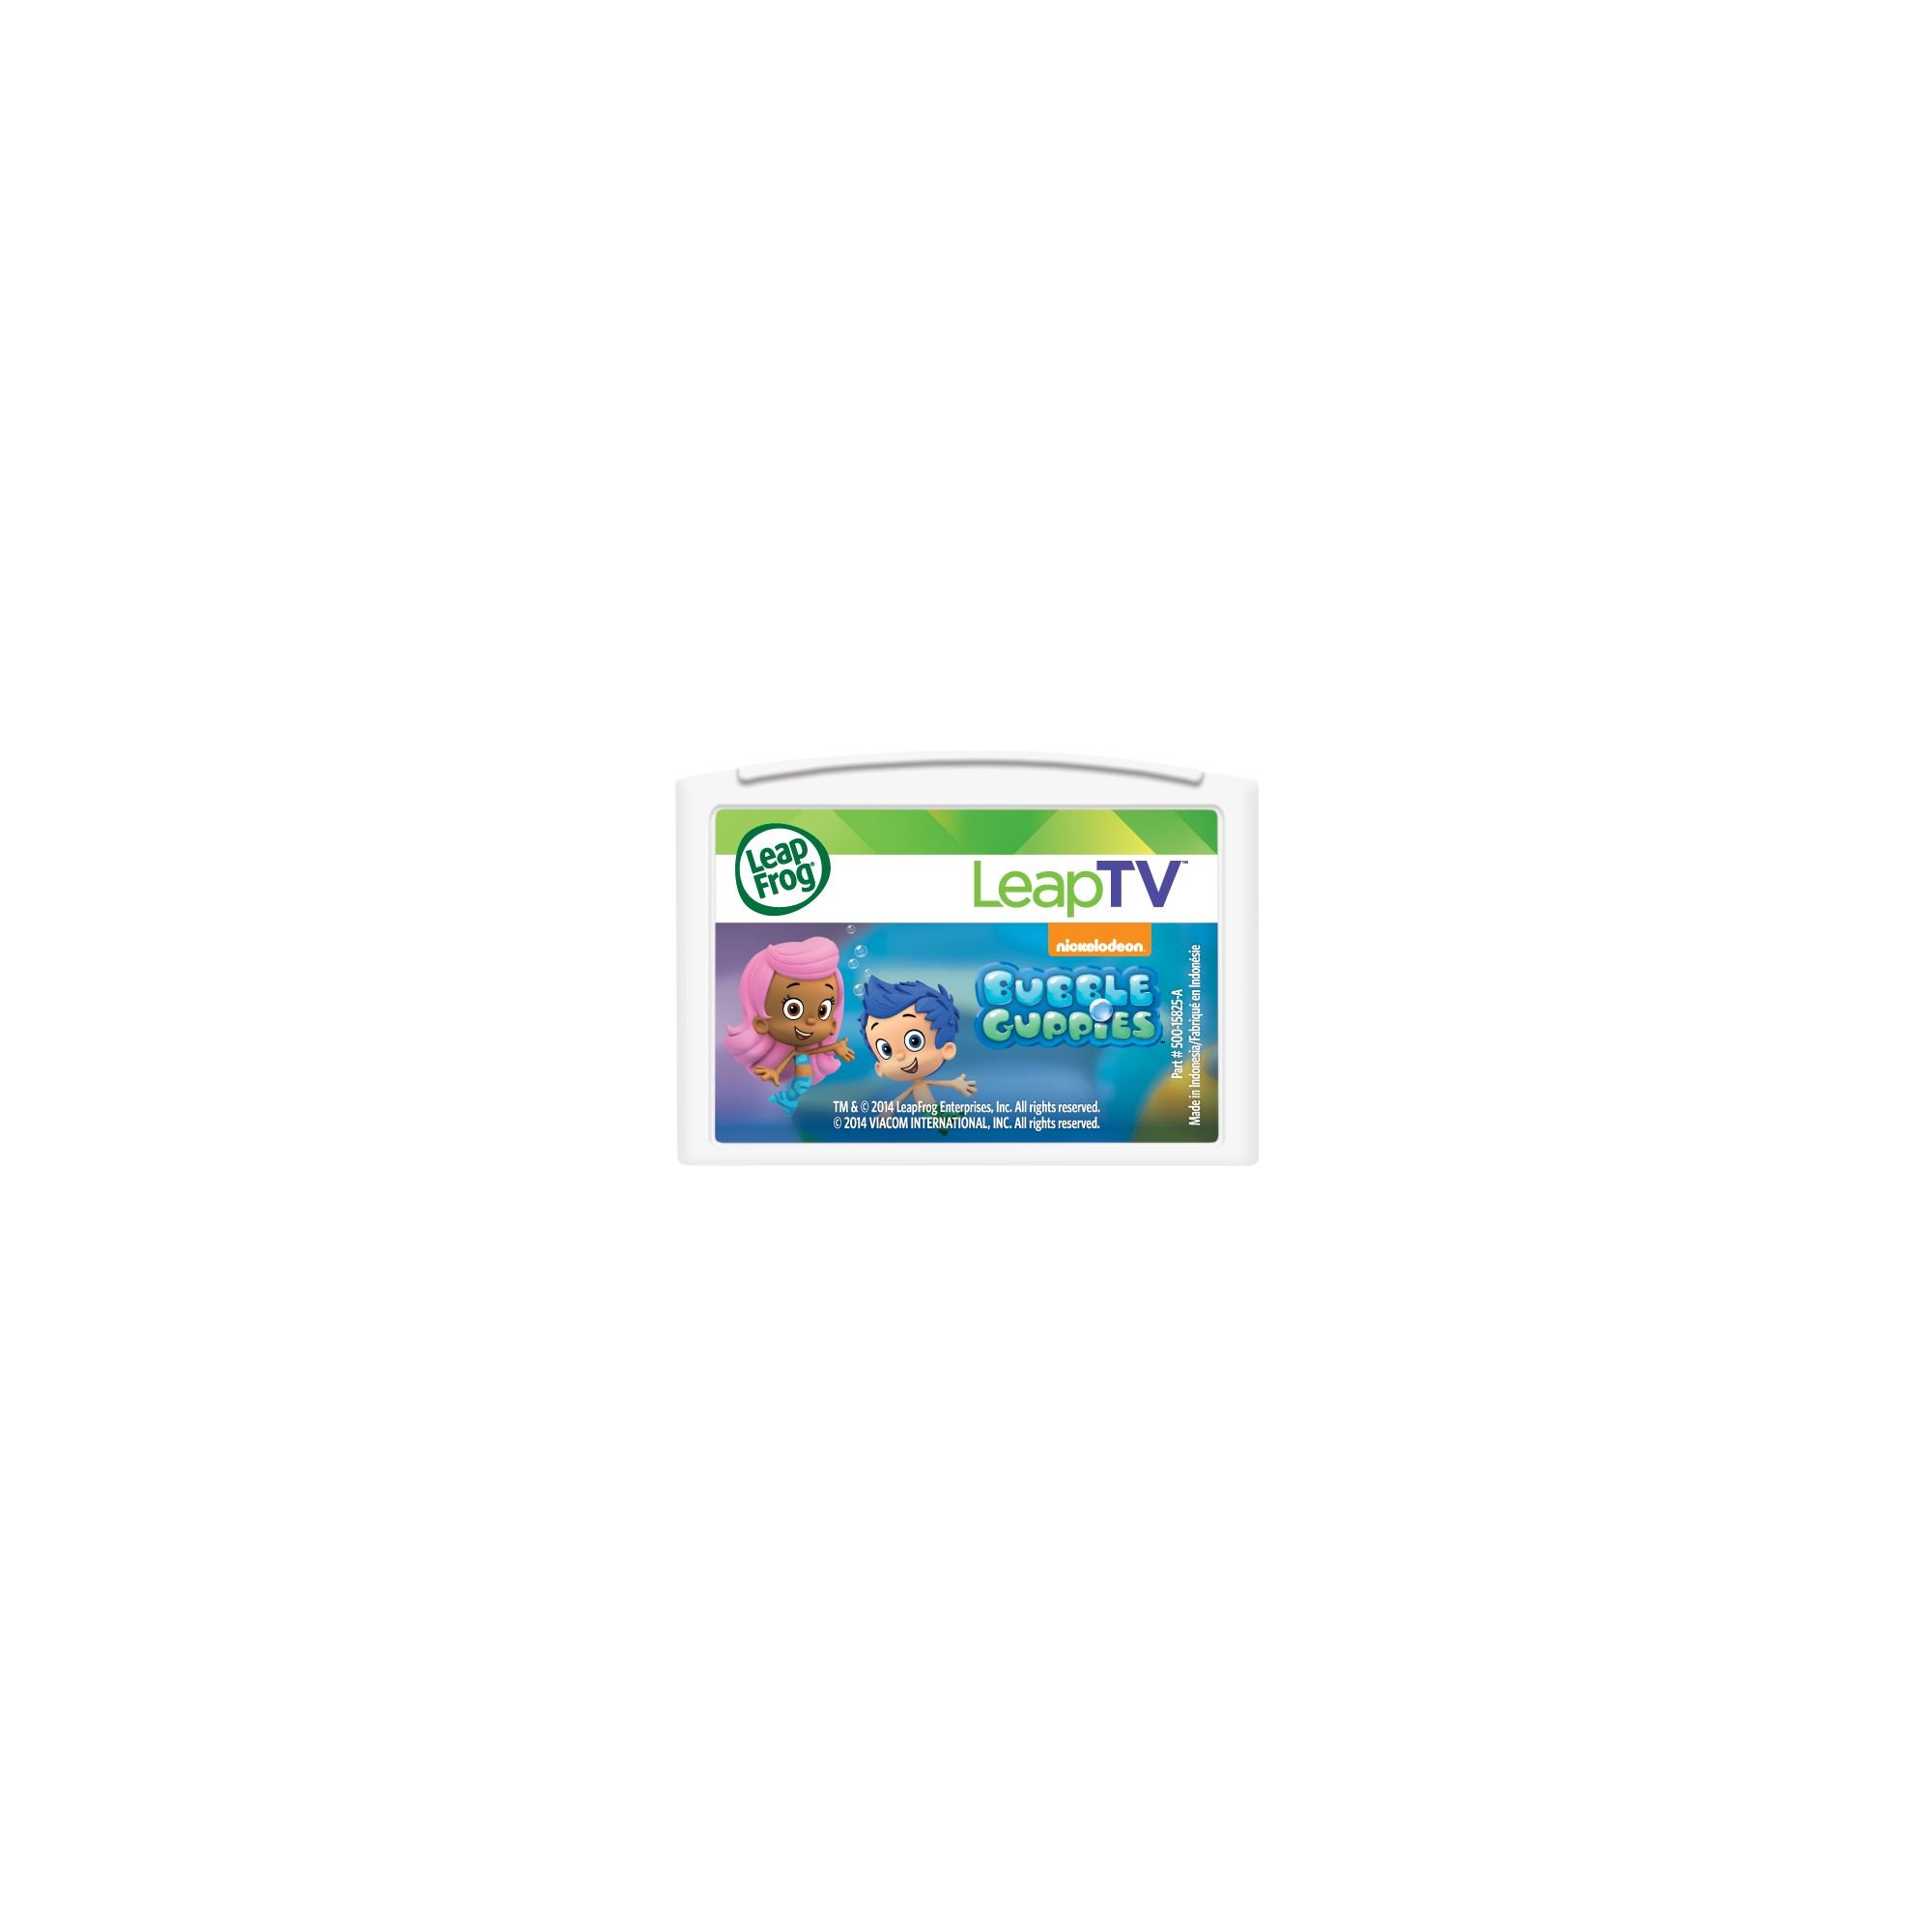 LeapFrog LeapTV Nickelodeon Bubble Guppies Educational, Active Video Game